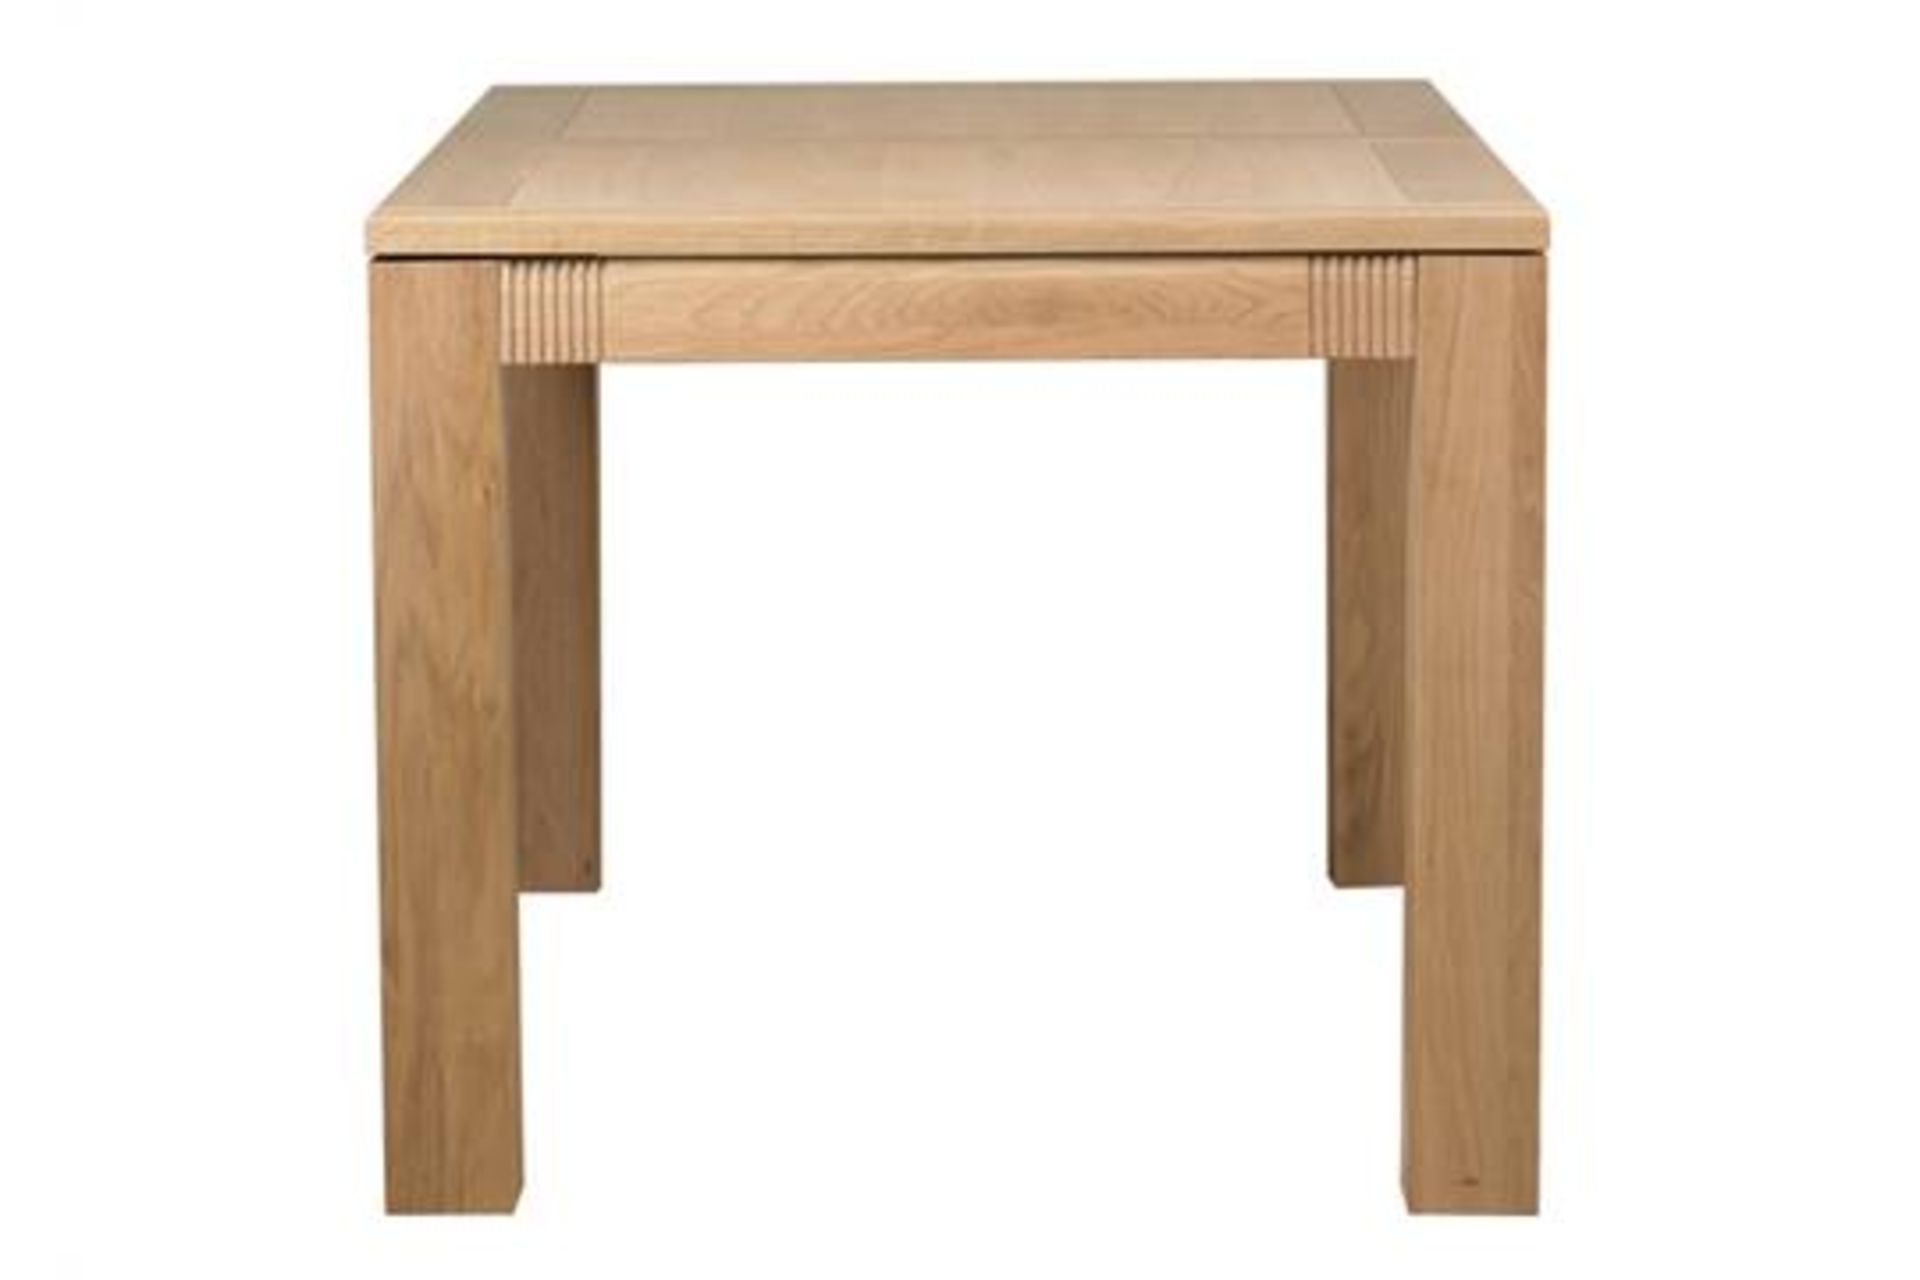 1 x Mark Webster Buckingham Small Extending Dining Table and Four High Back Chairs - White Wash - Image 2 of 8